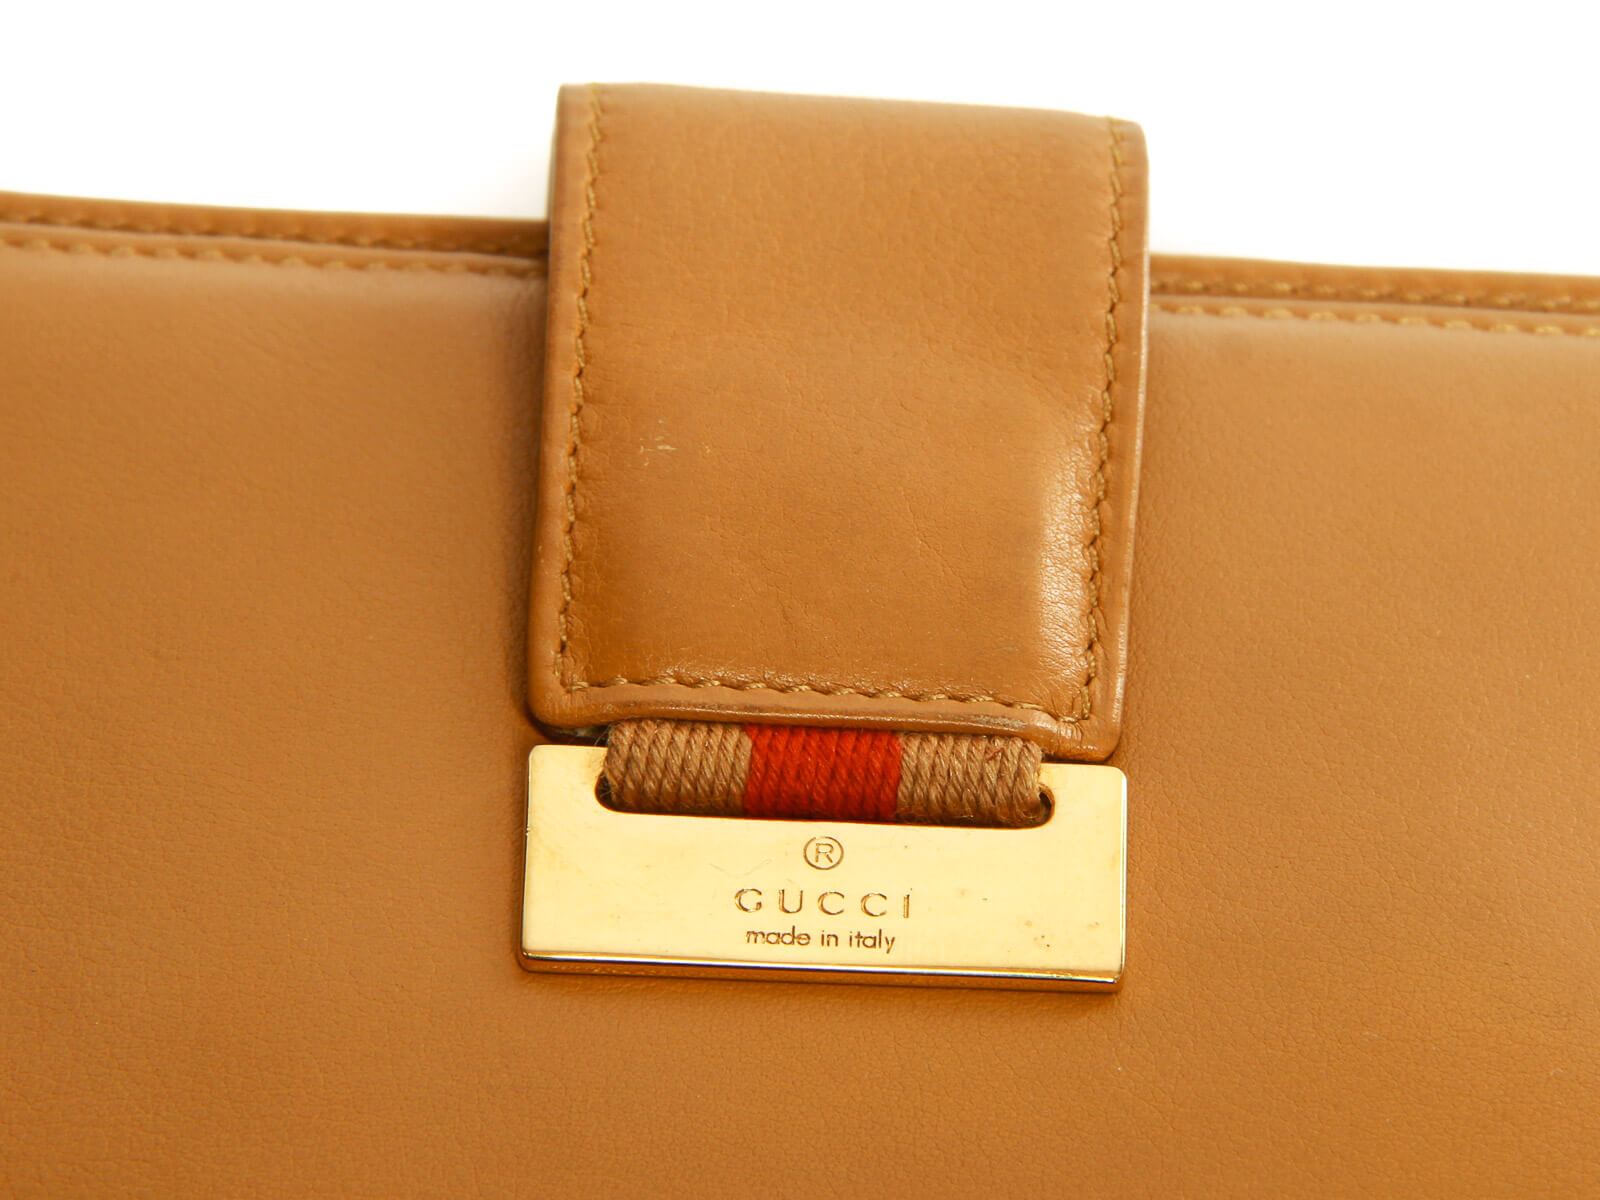 Gucci shima notebook cover Leather Brown Passport cover wallet Authentic